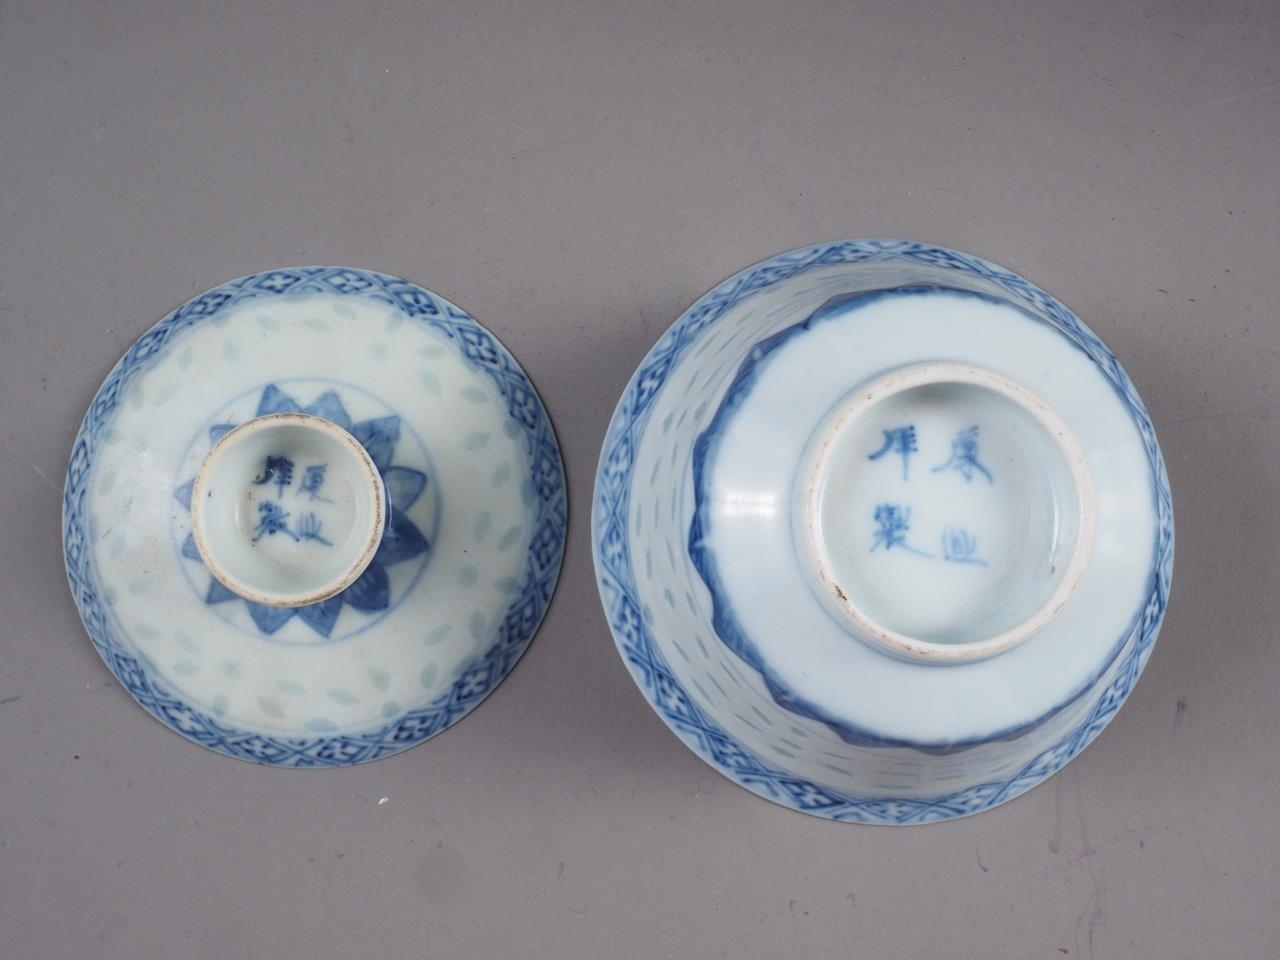 Three Chinese famille verte plates with leaf and butterfly decoration, 8 3/4" high, another - Image 2 of 2